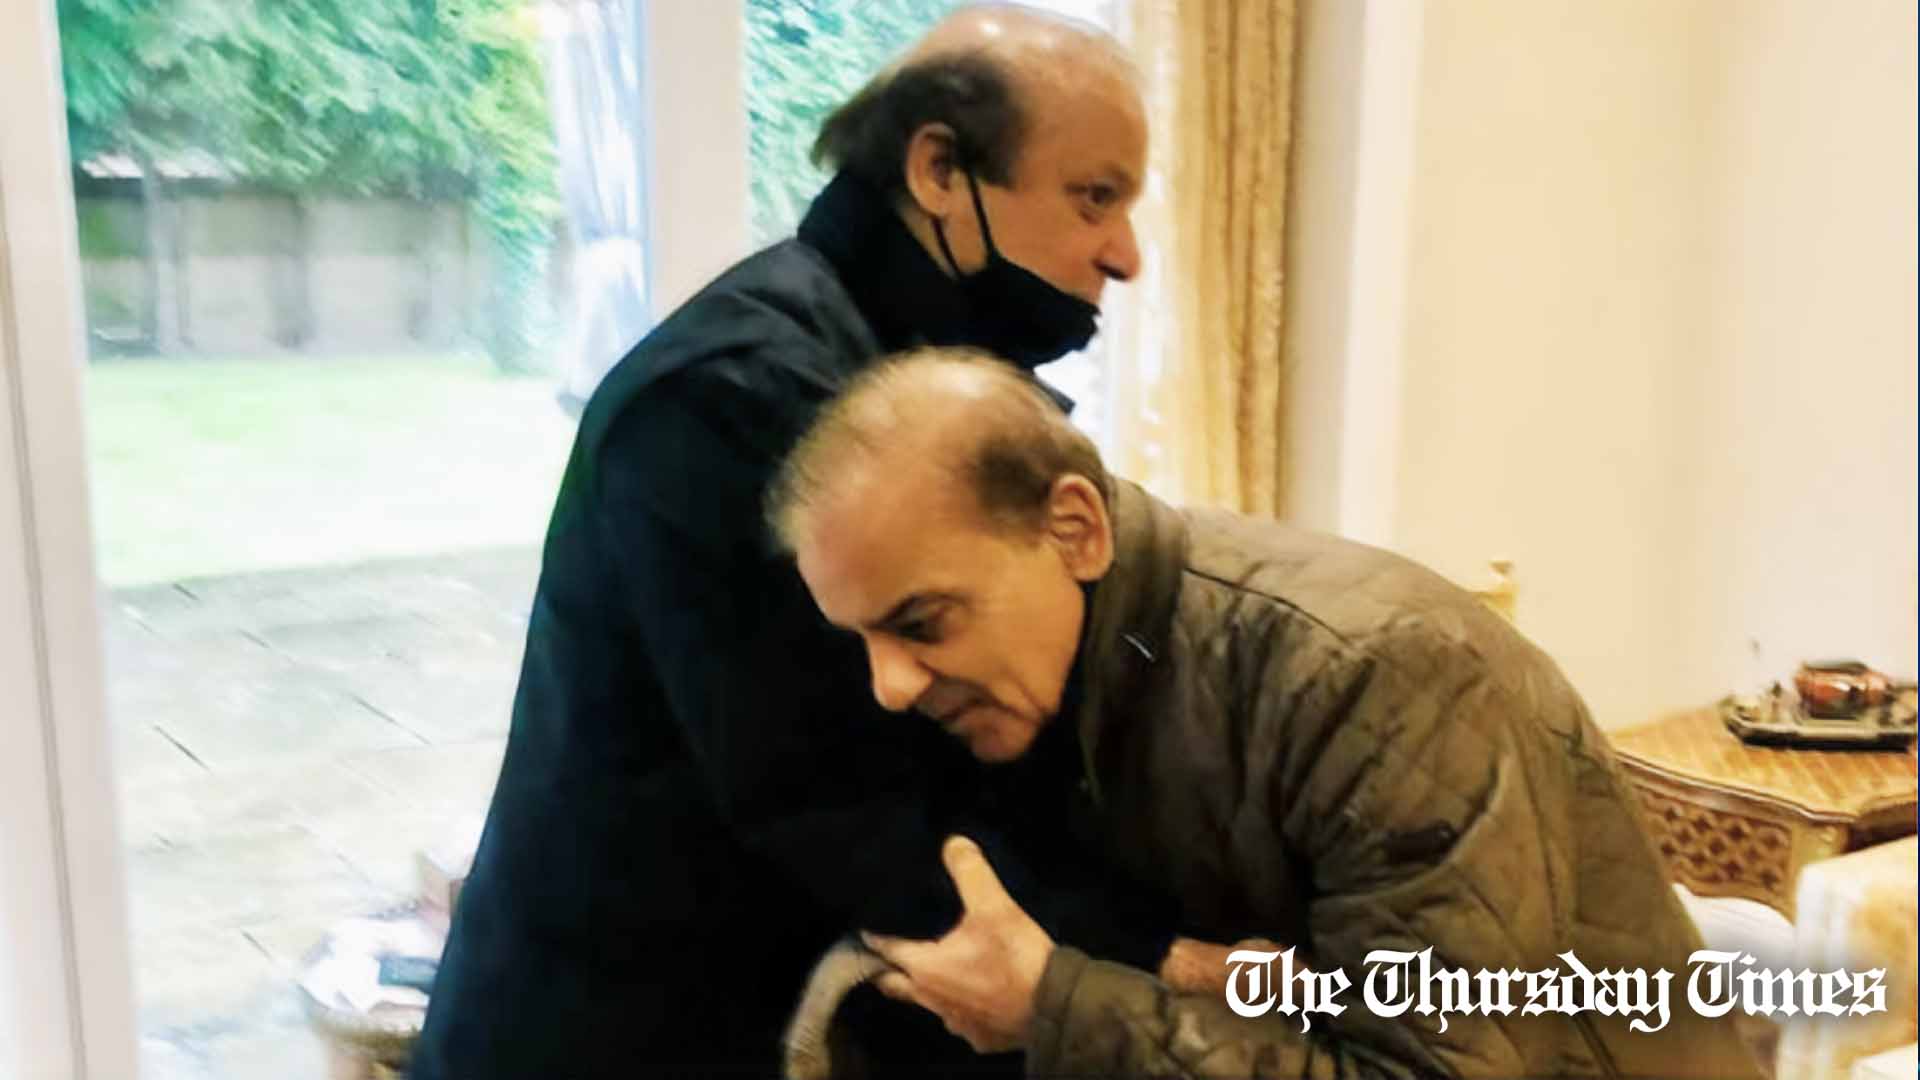 PML(N) chief Nawaz Sharif receives prime minister Shehbaz Sharif at London in 2022. — FILE/THE THURSDAY TIMES